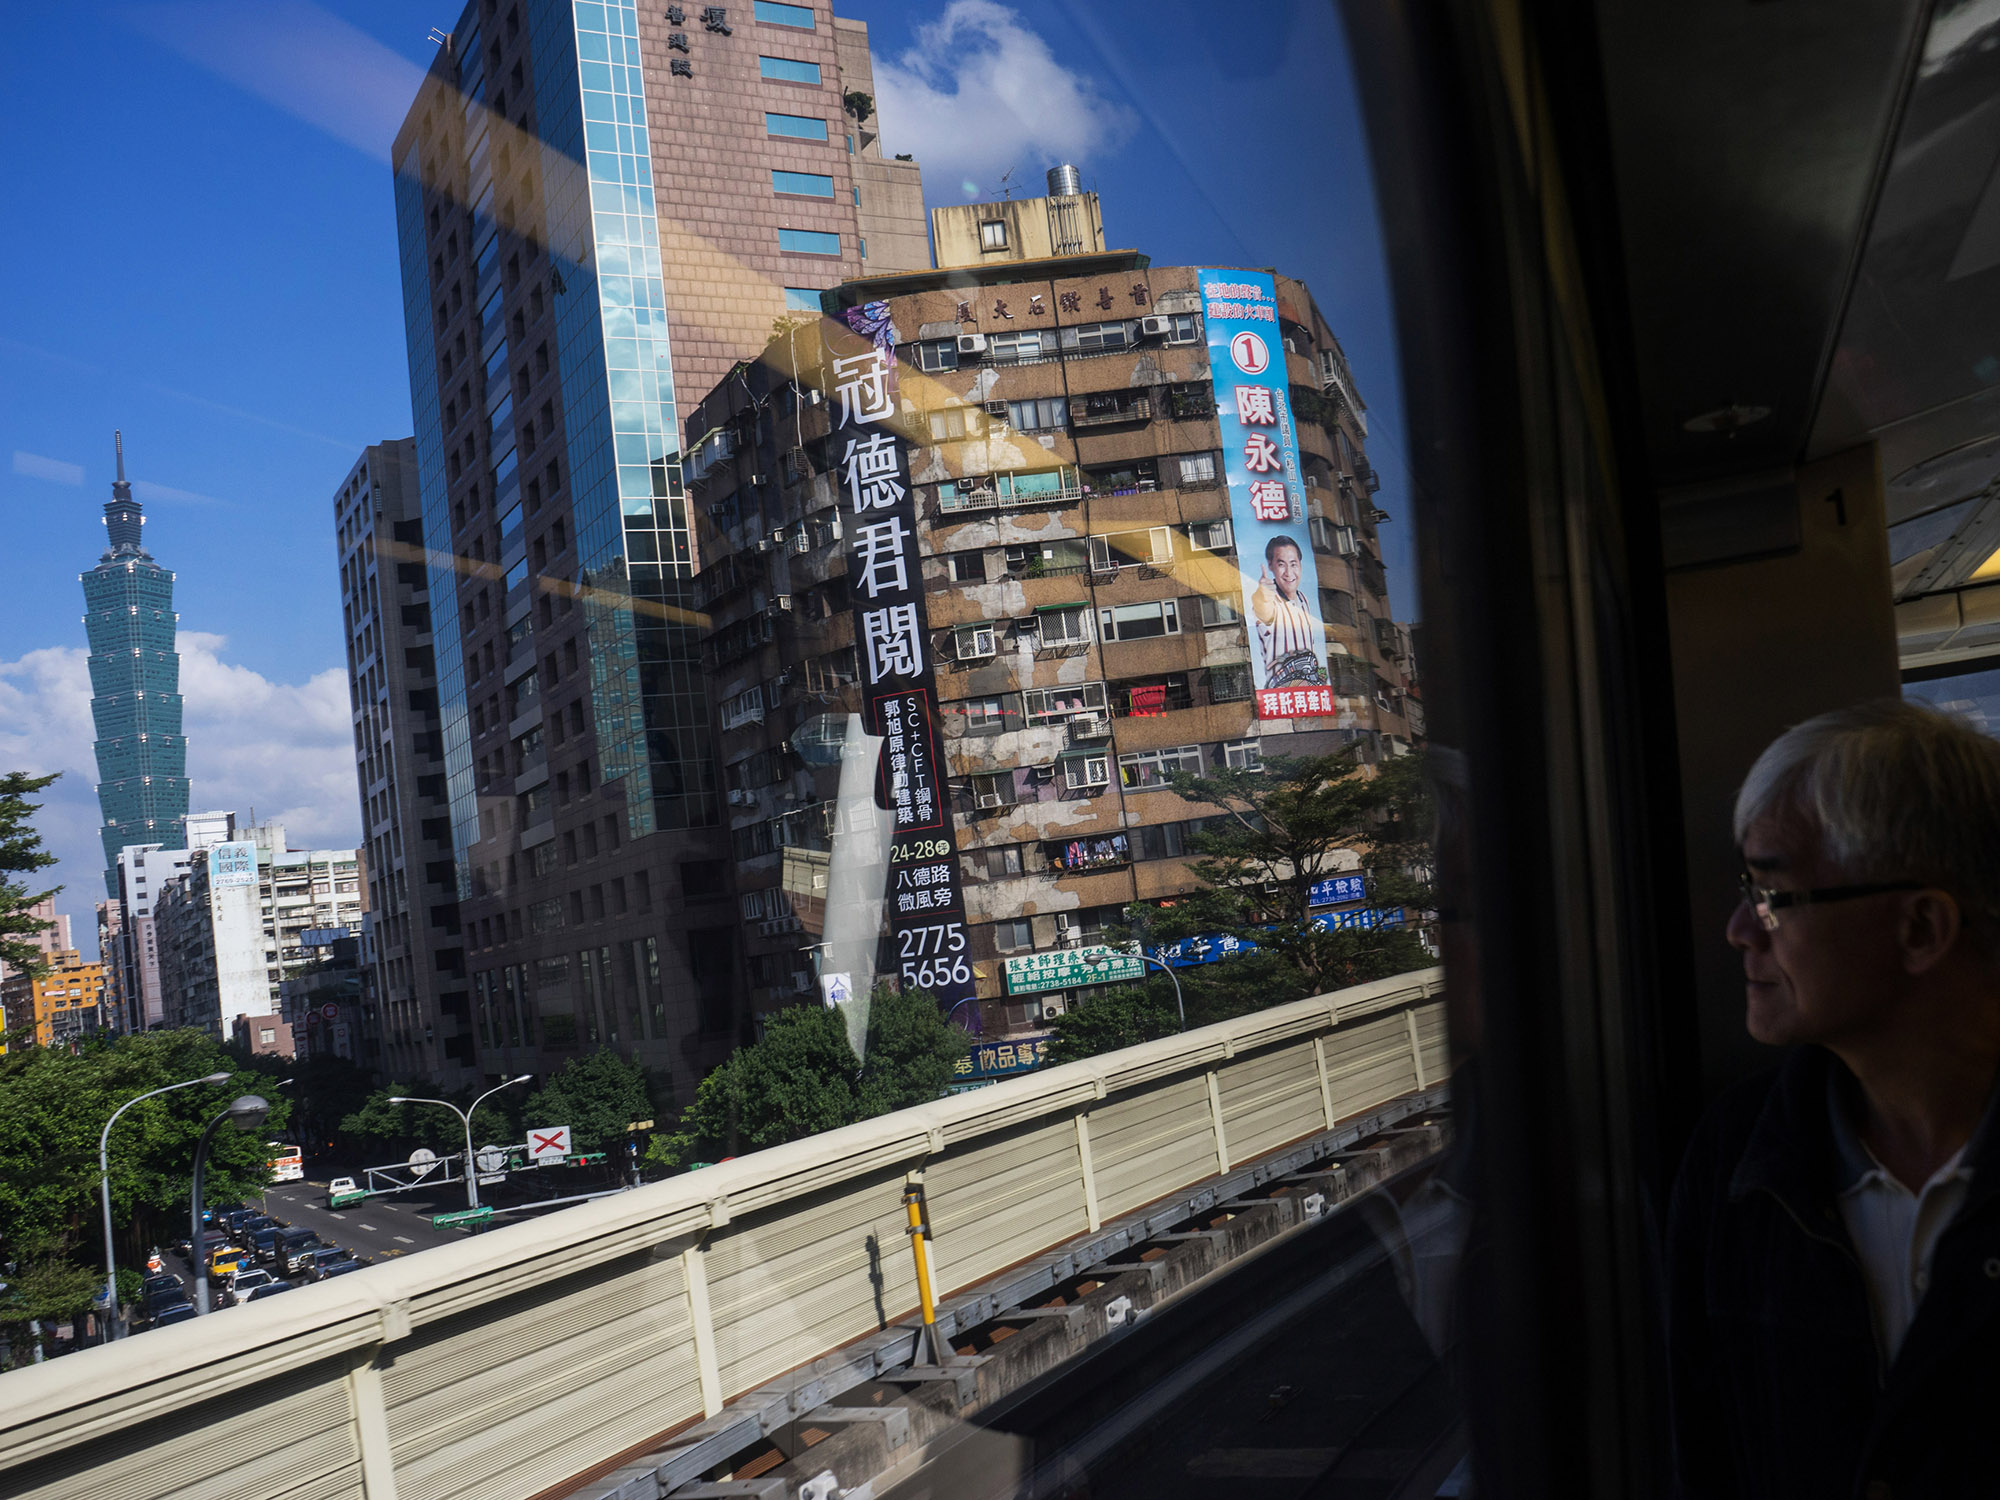 A passenger looks out at the Taipei 101 building, left, and other commercial and residential buildings from a Mass Rapid Transit (MRT) train, operated by Taipei Rapid Transit Corp., as it travels along an elevated track in Taipei, Taiwan.